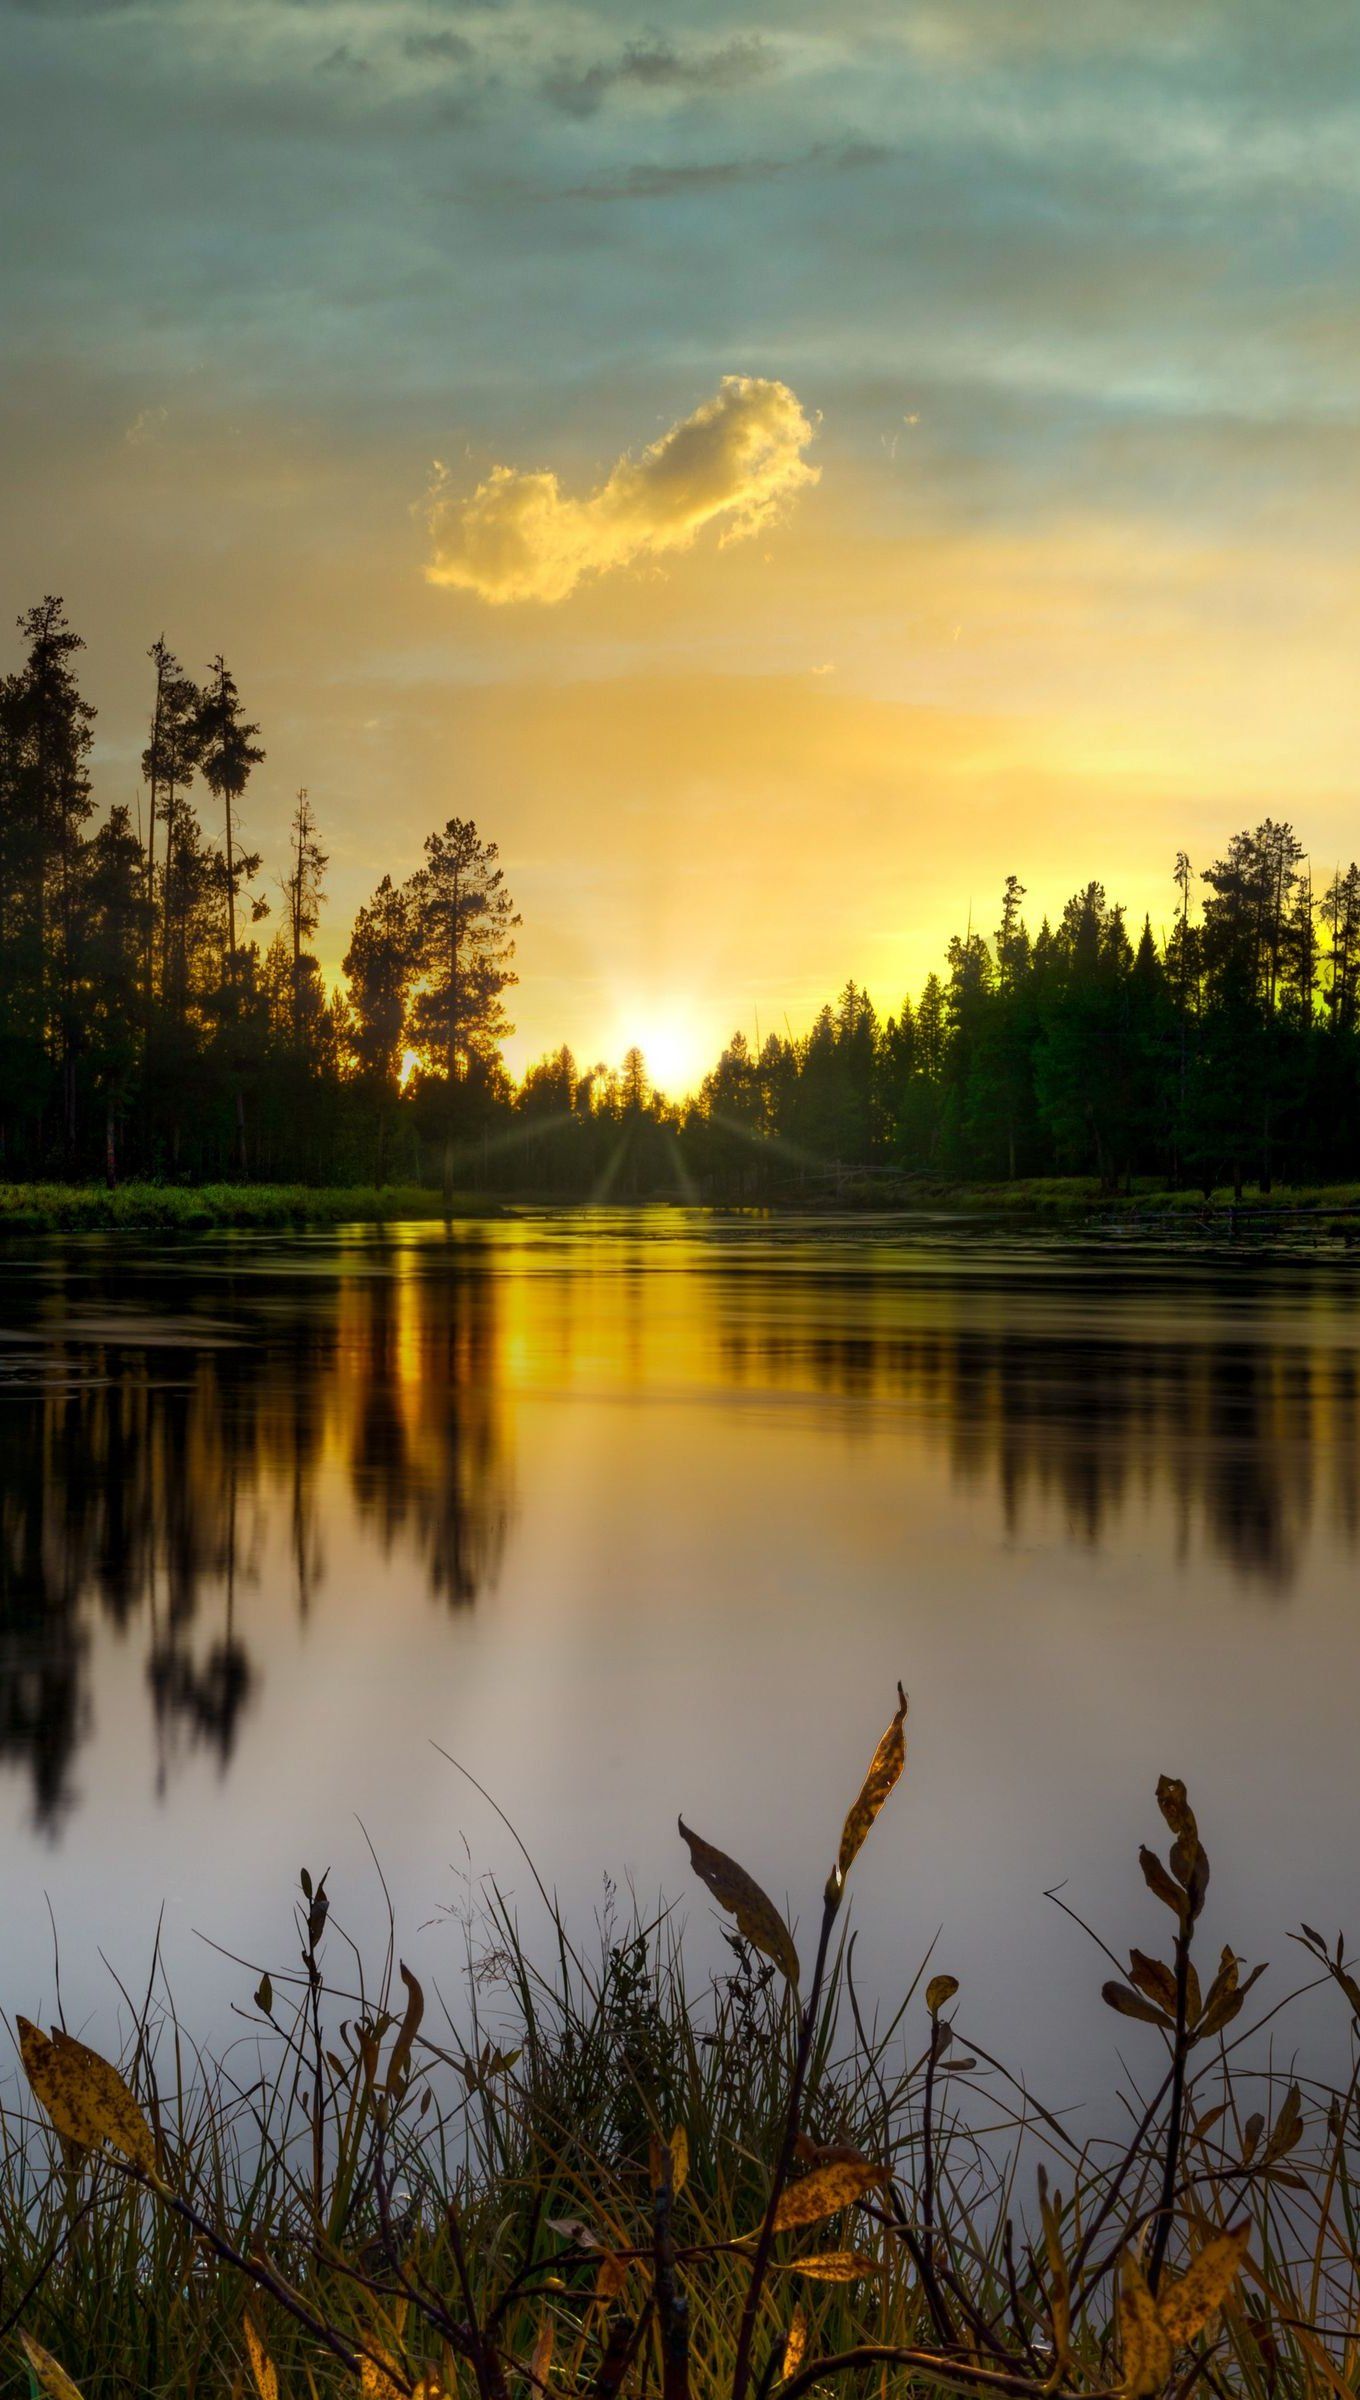 Lake in the forest at sunset Wallpaper 4k Ultra HD